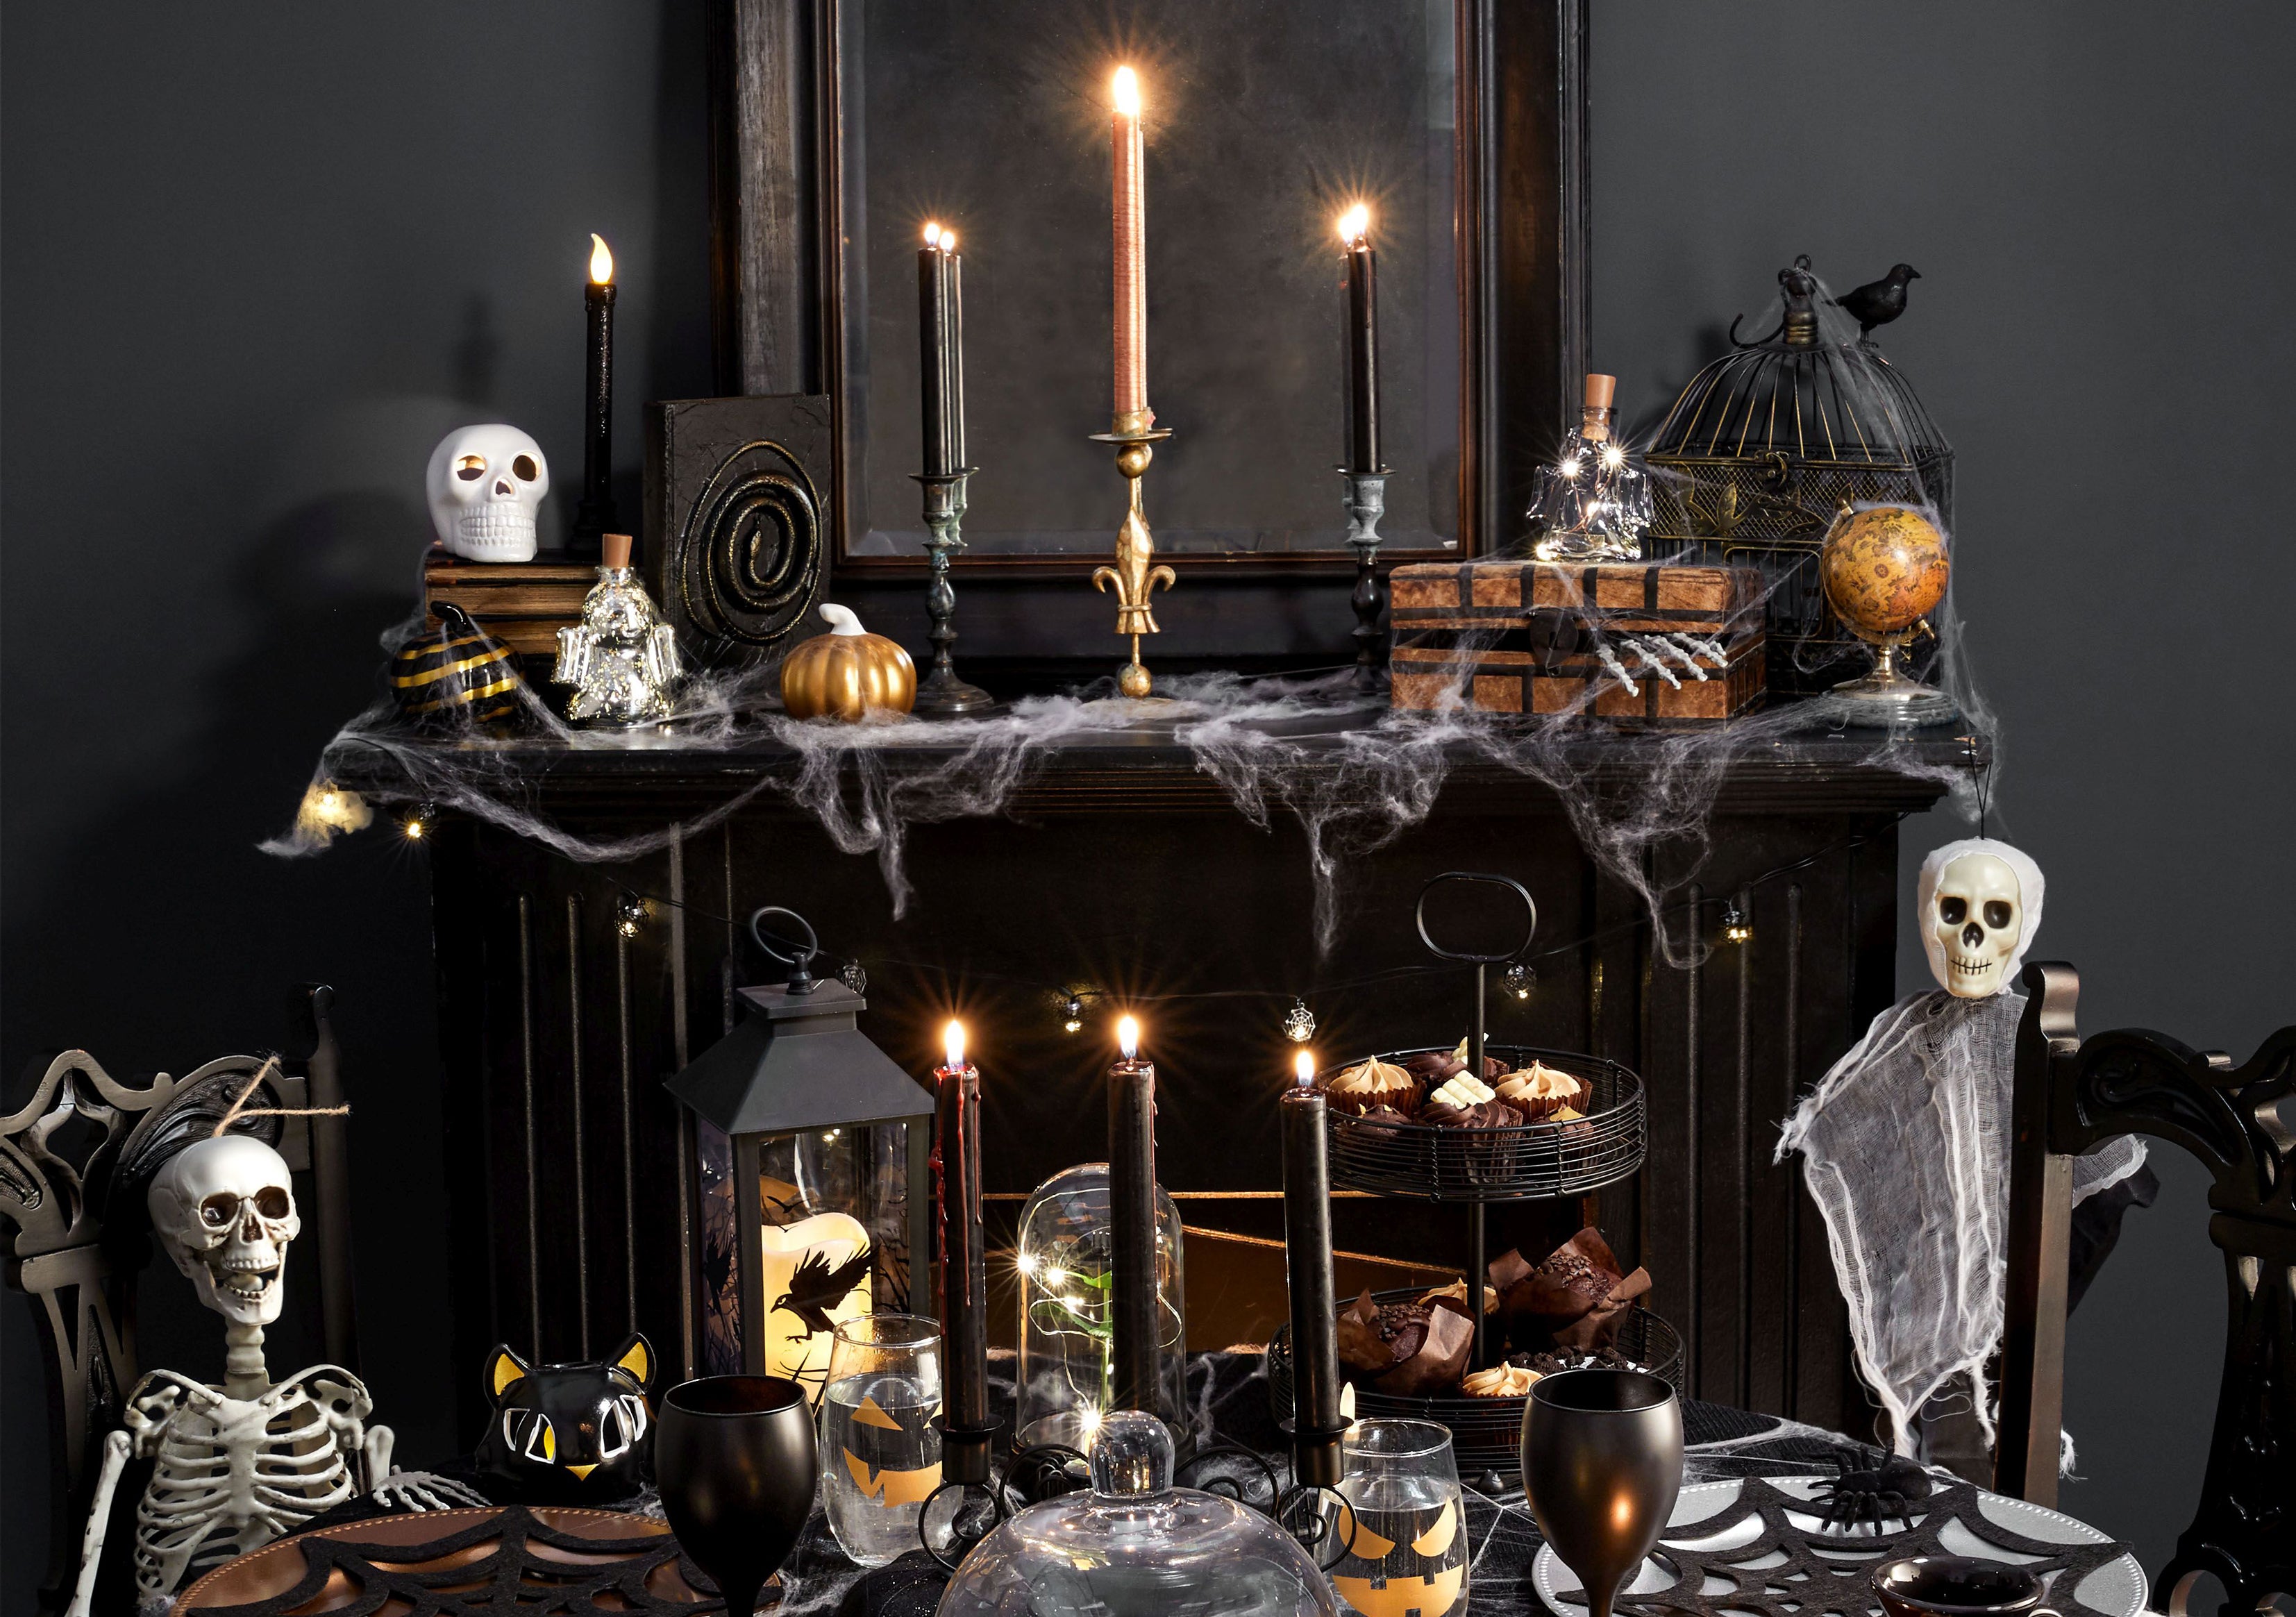 Halloween decor 2021: 12 wicked ways to make your home creepy | The ...